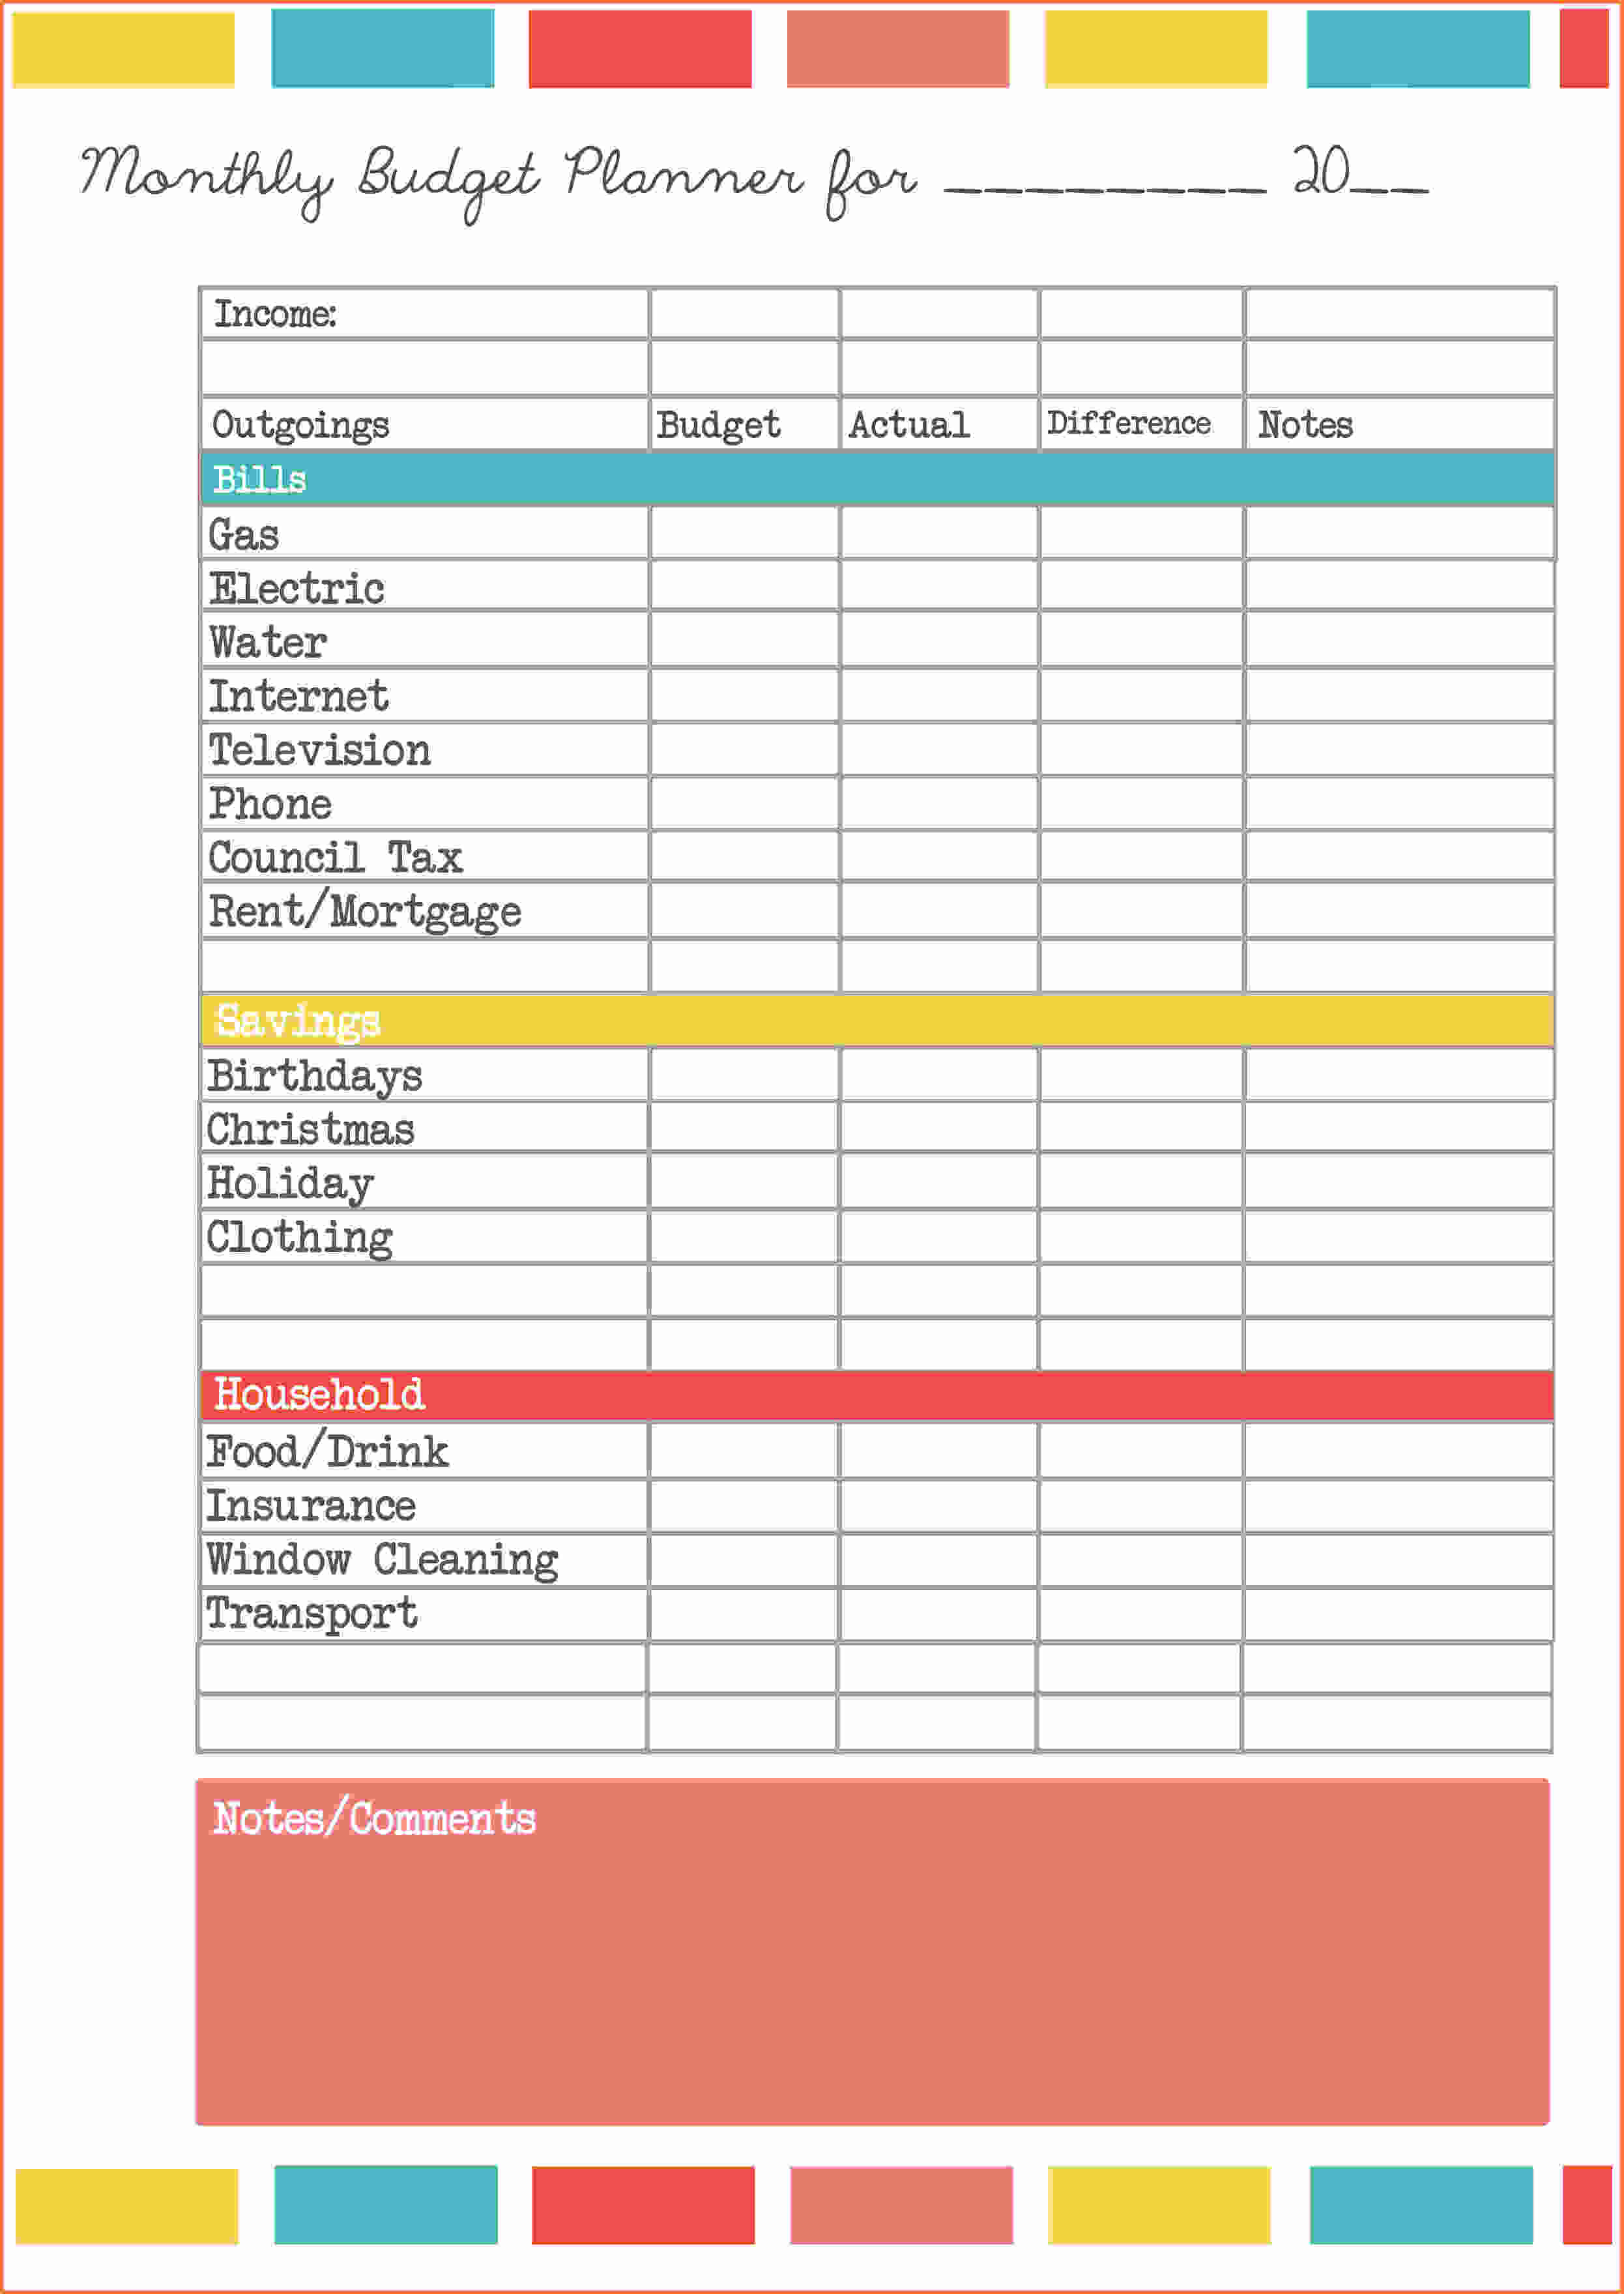 Mortgage Budget Planner Spreadsheet With Regard To Free Budget Worksheet Template Pictures High Printable Homeadsheet